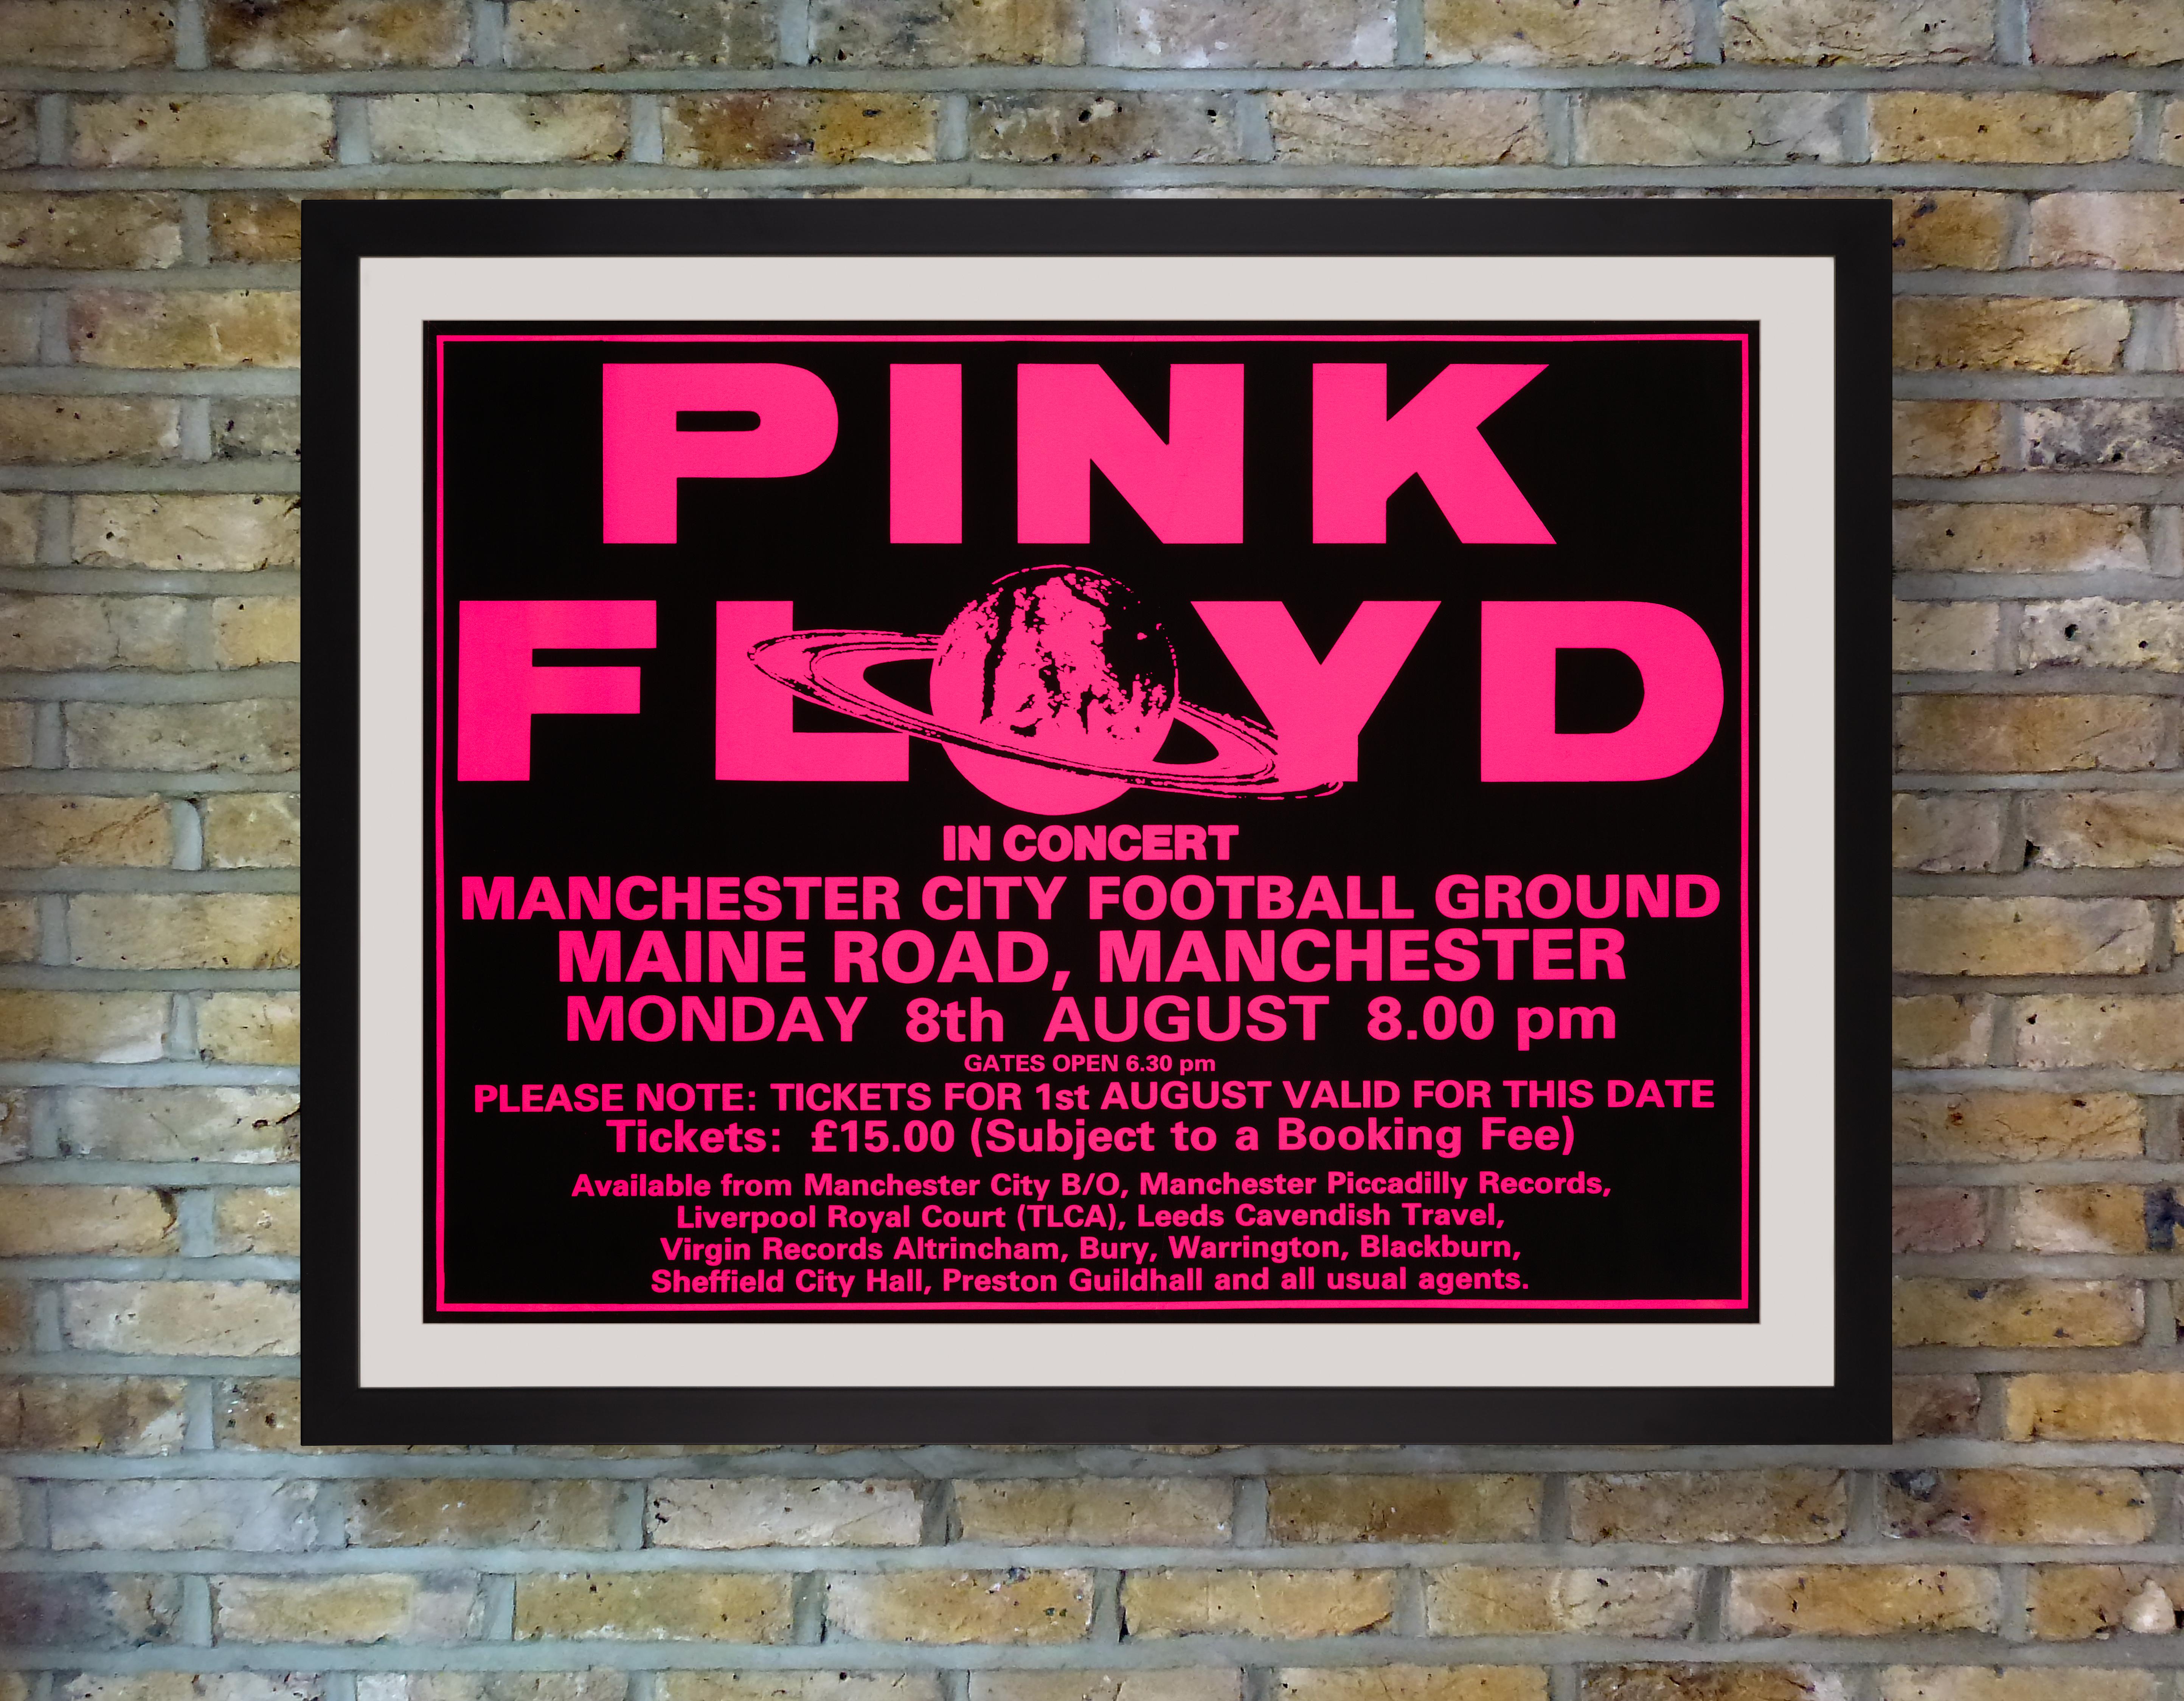 A shocking fluoro pink and black silkscreen poster for a performance by Pink Floyd at Manchester City Football Ground, Maine Road, Manchester, England, on 8th August 1988 during the first European leg of the band's mammoth A Momentary Lapse of